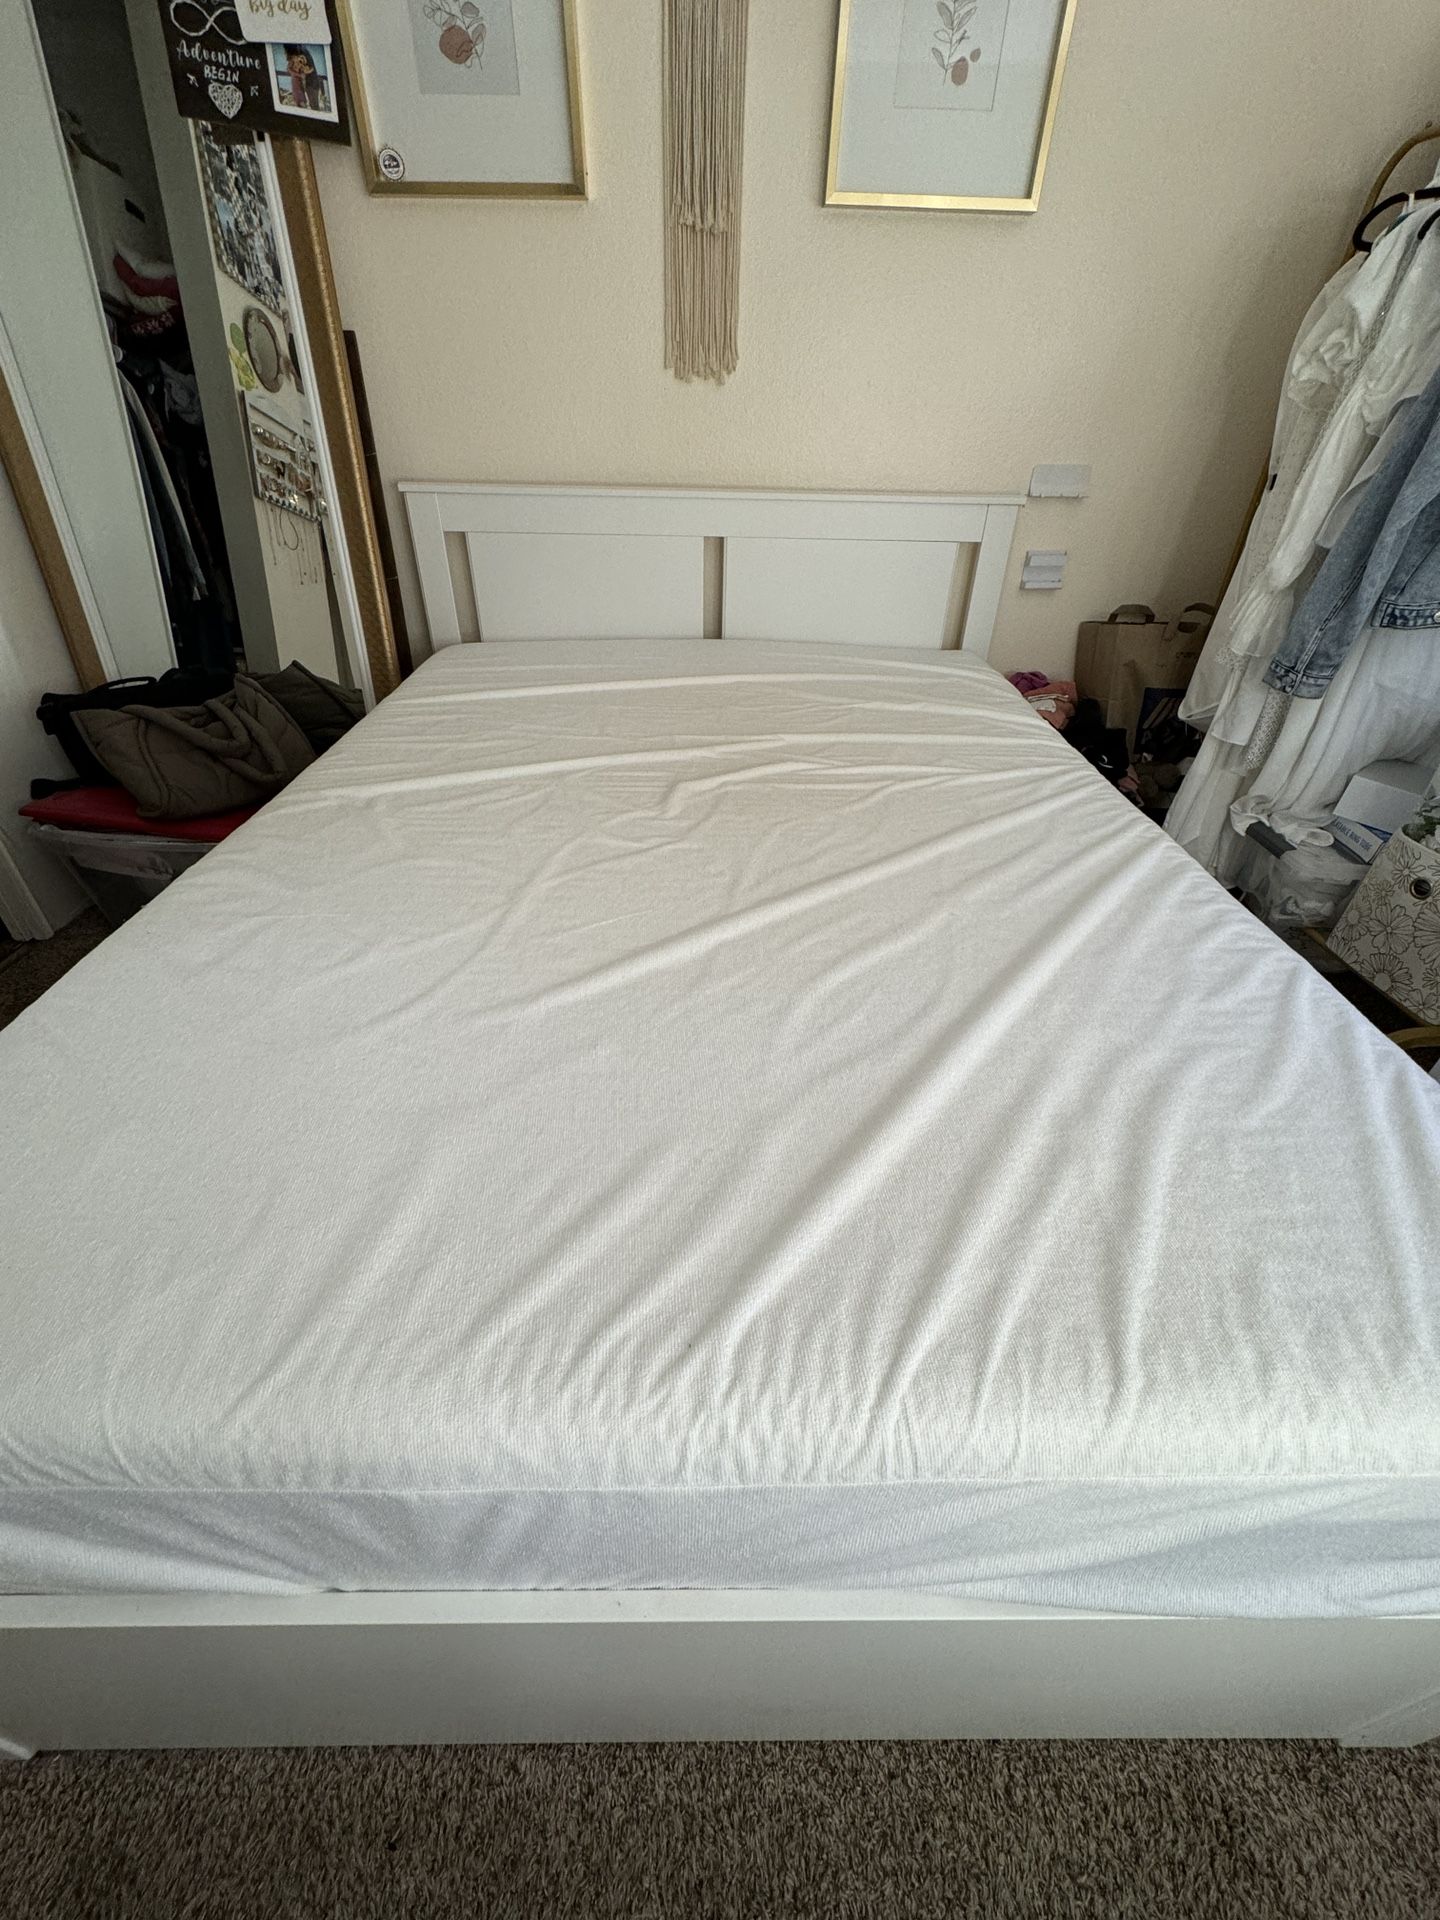 FULL SIZE BED 